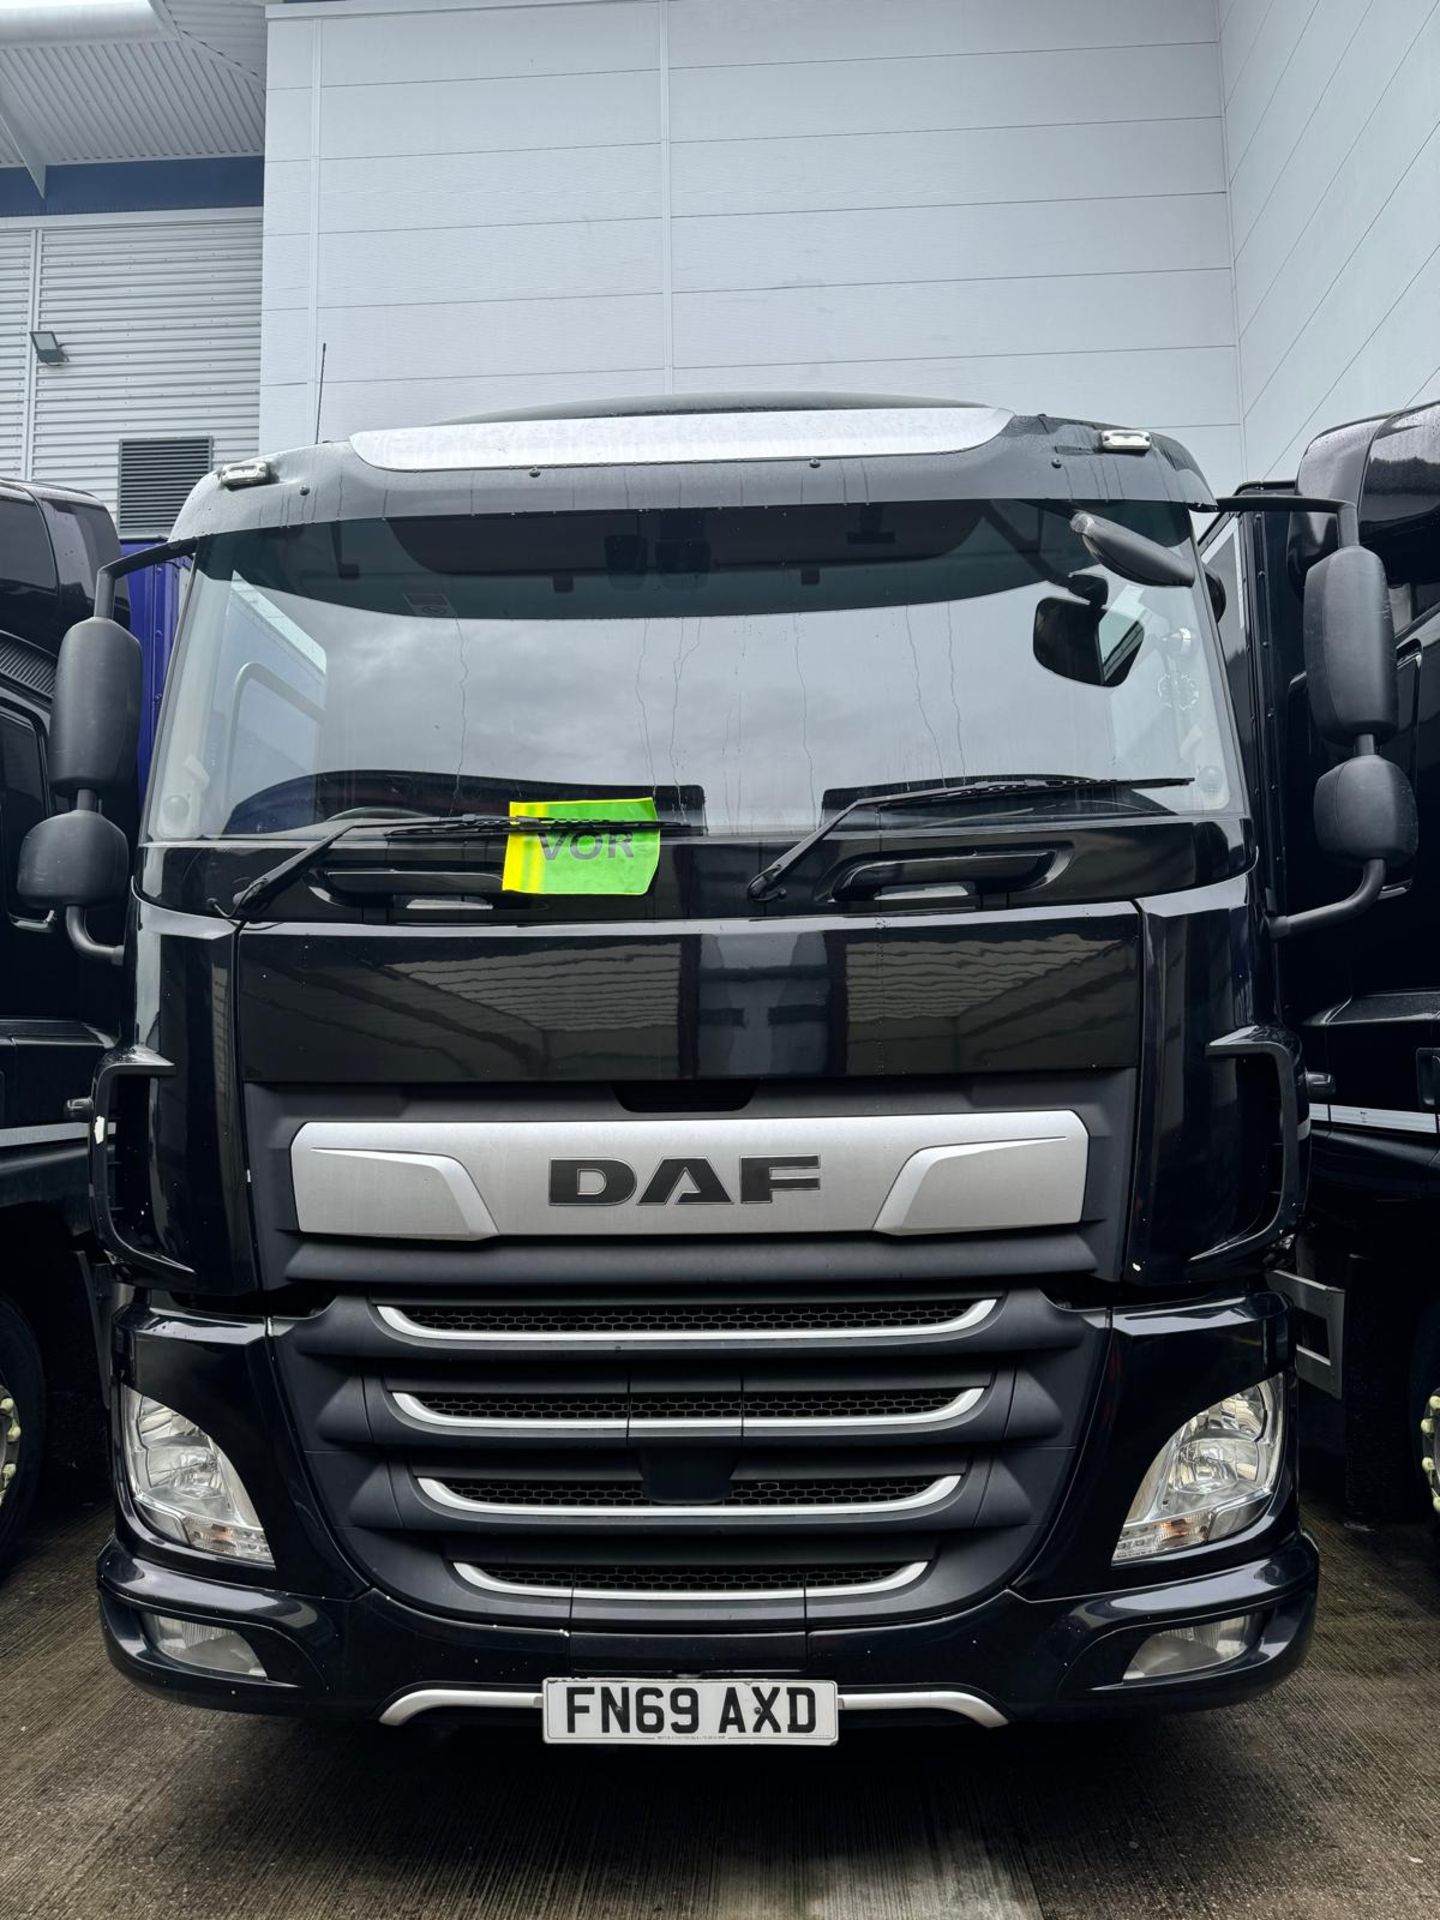 2019, DAF CF 260 FA (Ex-Fleet Owned & Maintained) - FN69 AXD (18 Ton Rigid Truck with Tail Lift)